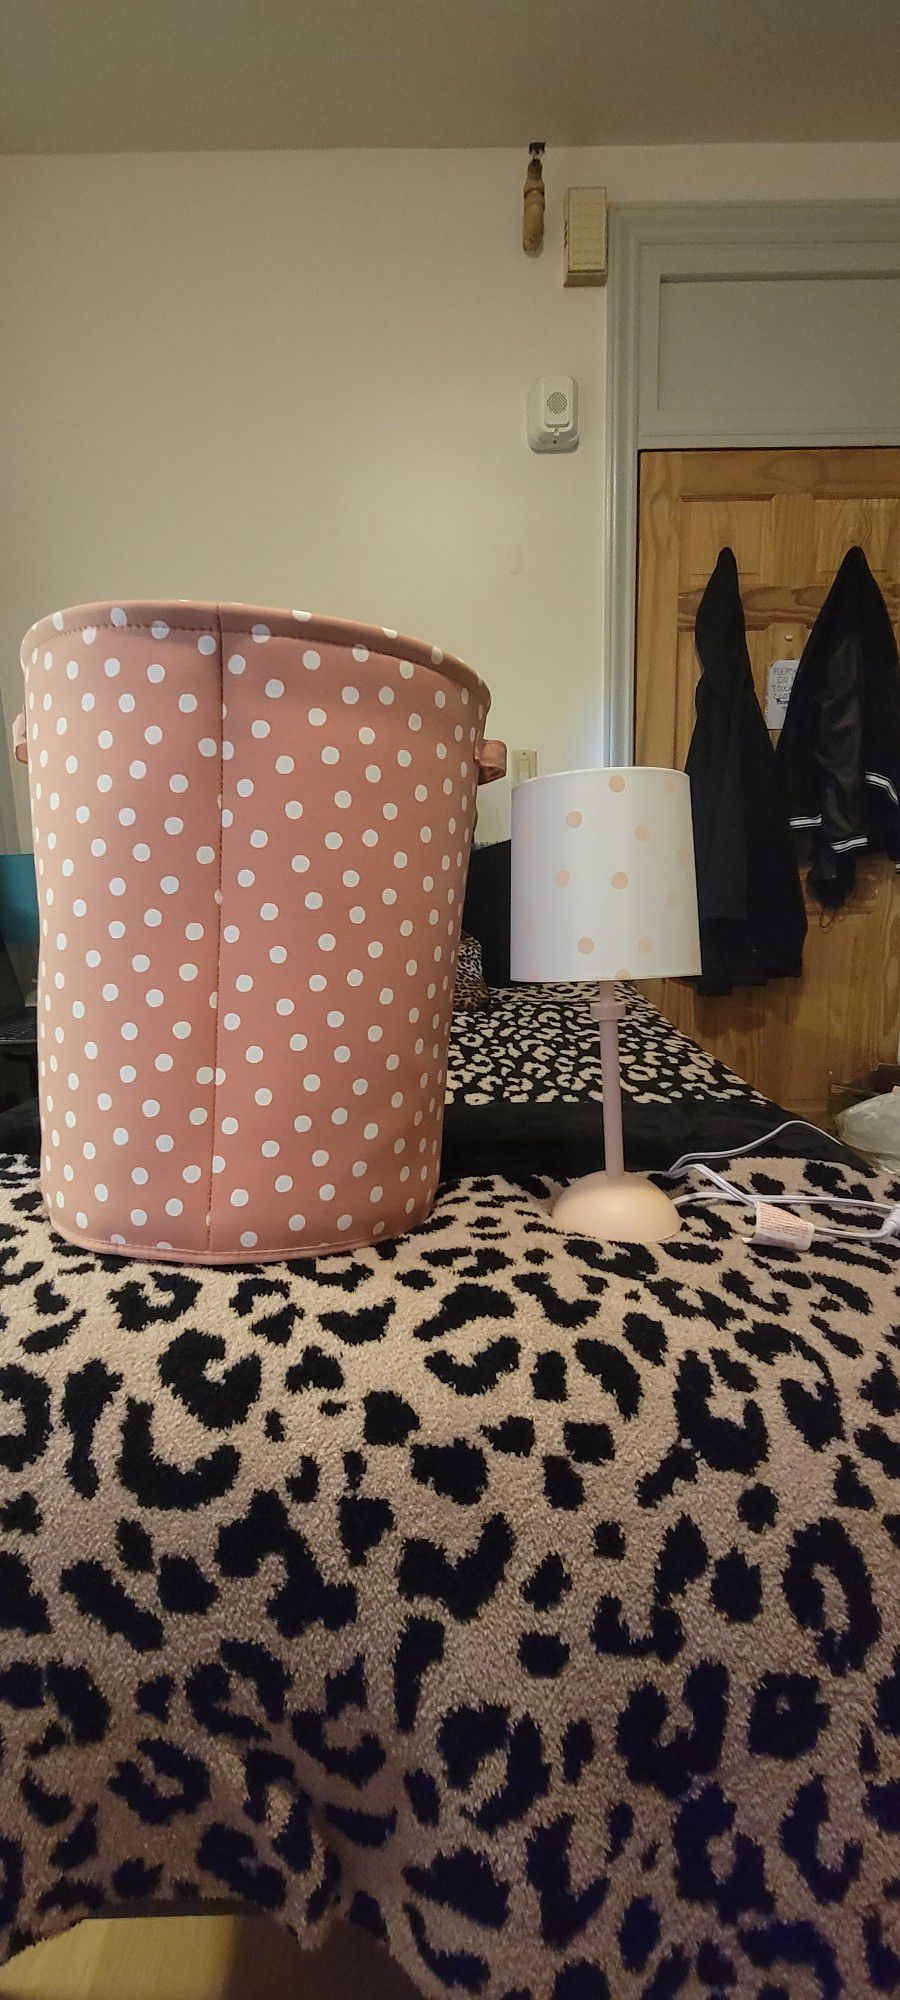 Pink And White Polk A Dot Lamp And Landry Hamper